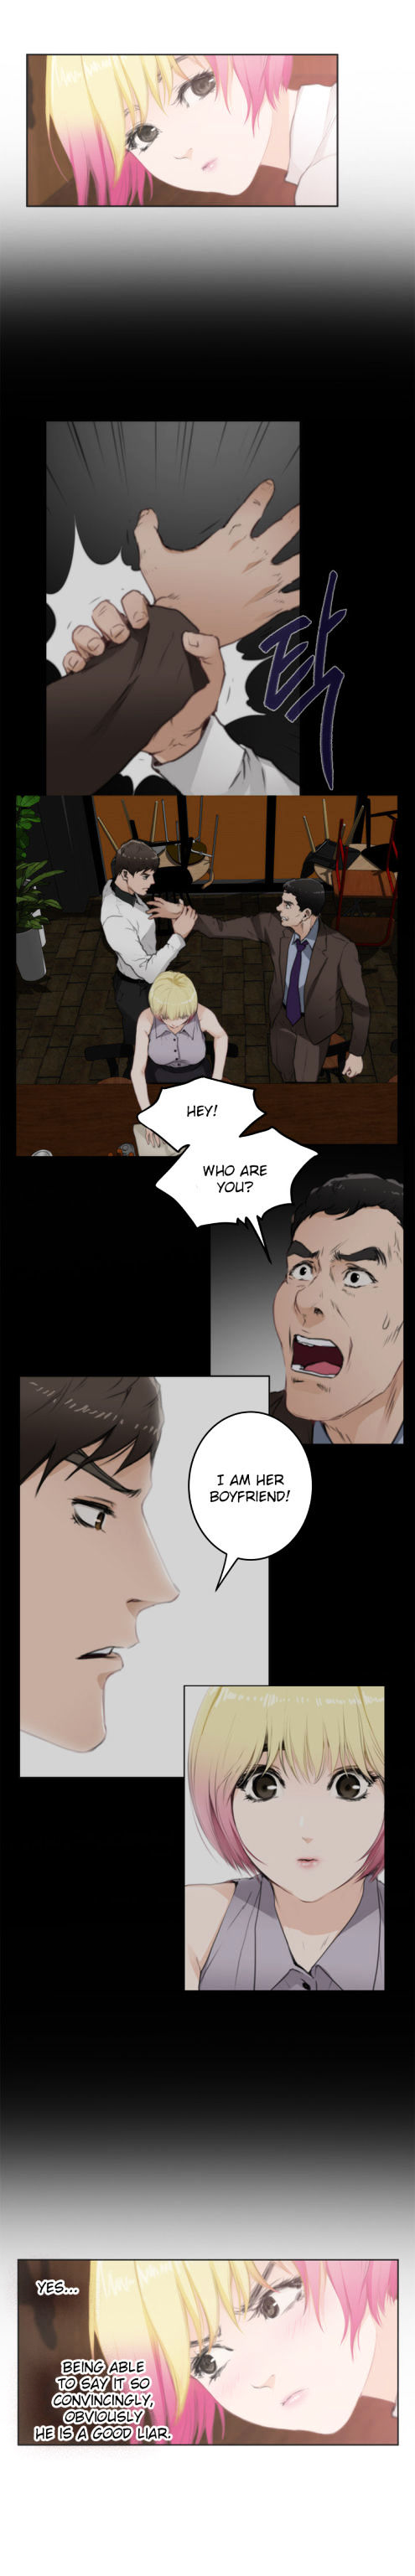 H-Mate - Chapter 74 Page 5